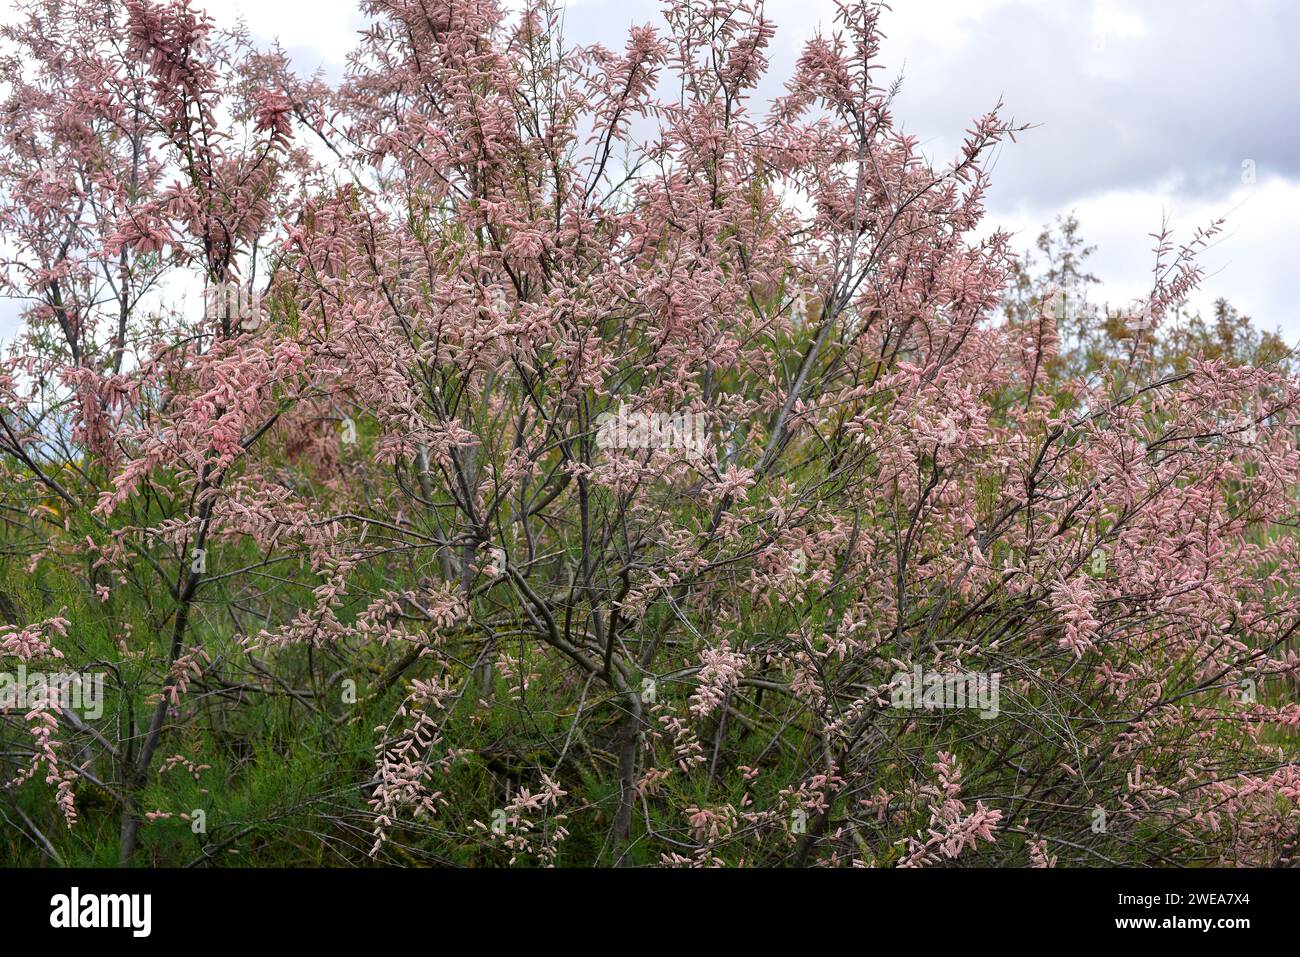 French tamarisk (Tamarix gallica) is a deciduous shrub or small tree native to western Asia and common in Mediterranean Basin coasts. Flowers detail. Stock Photo